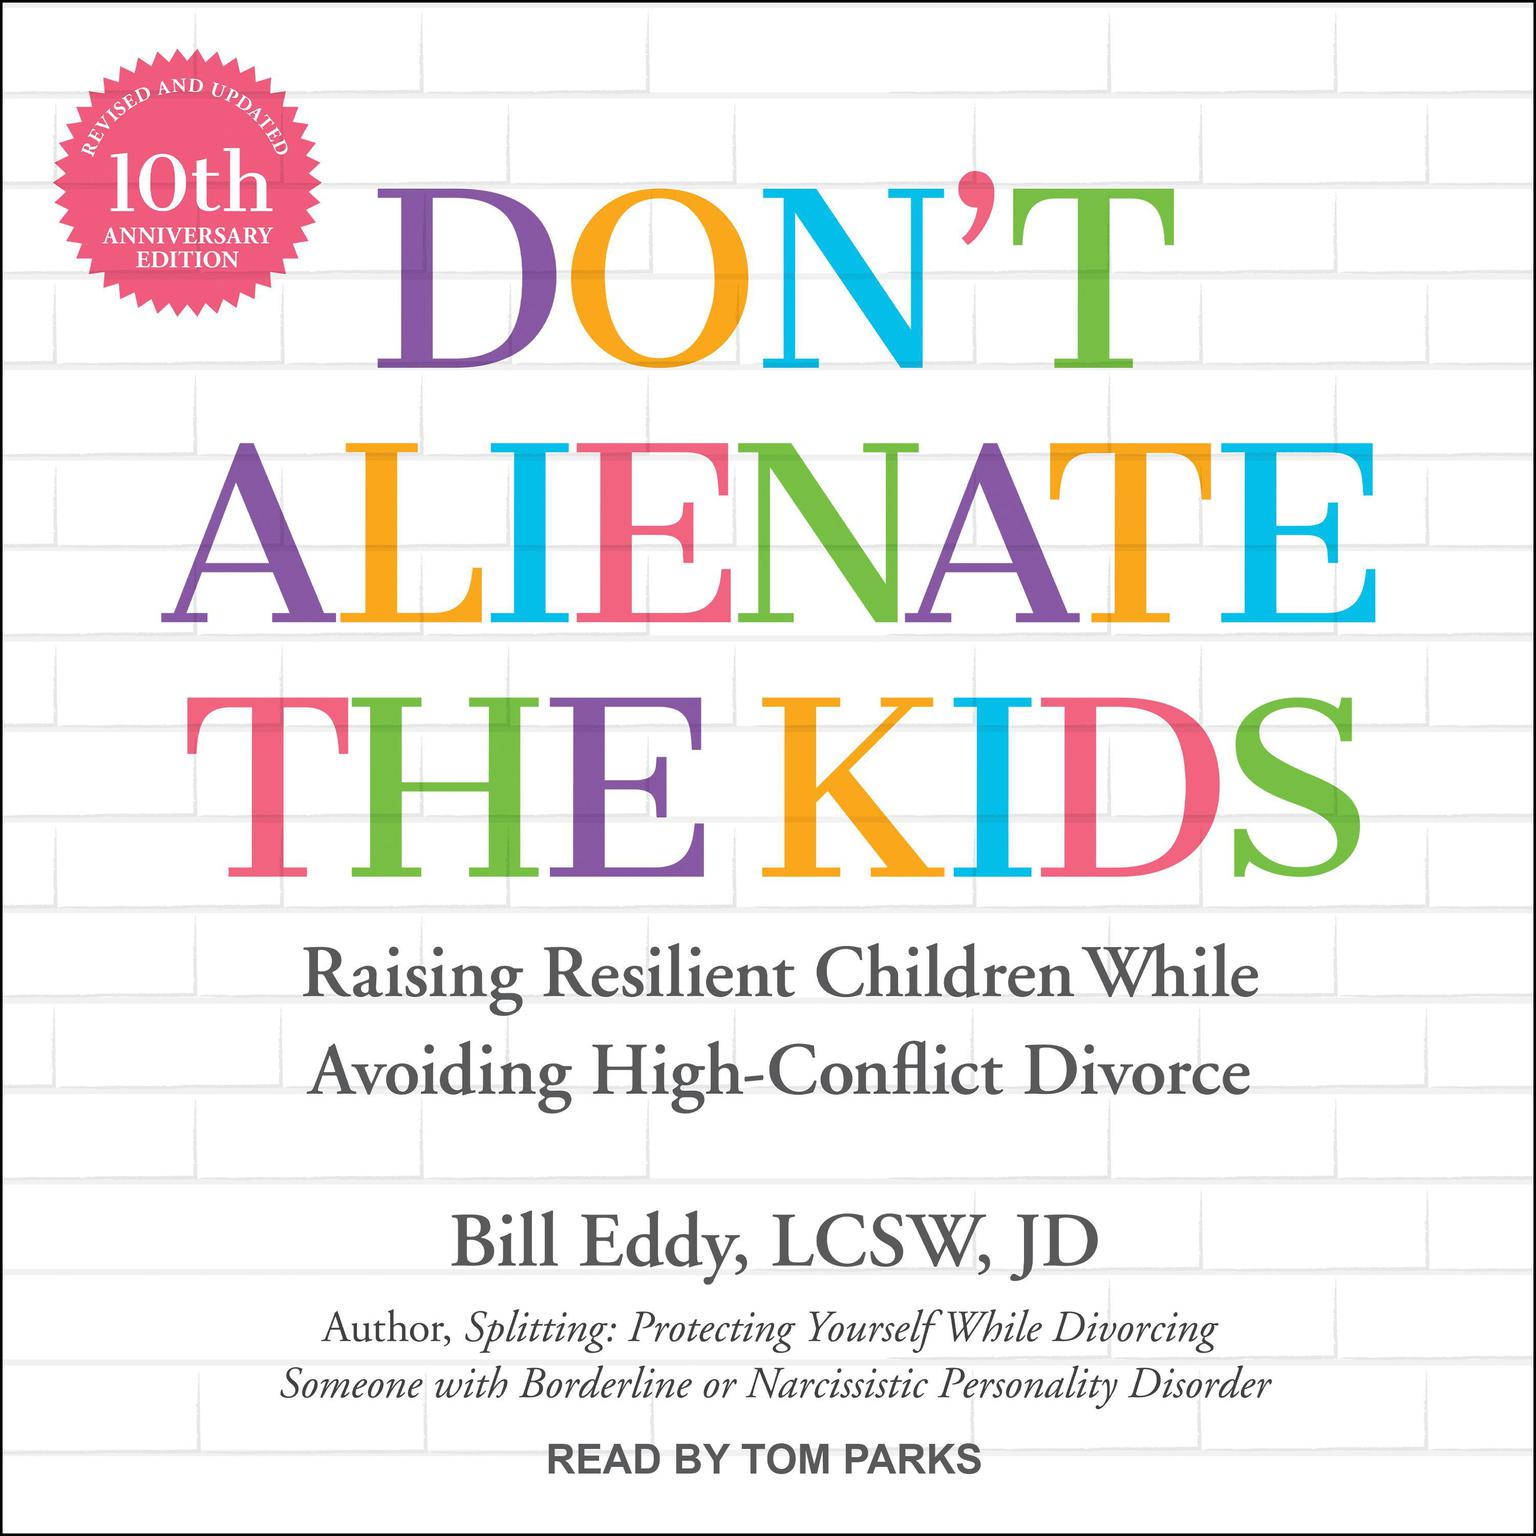 Dont Alienate the Kids: Raising Resilient Children While Avoiding High-Conflict Divorce, 10th Anniversary Edition Audiobook, by Bill Eddy, LCSW